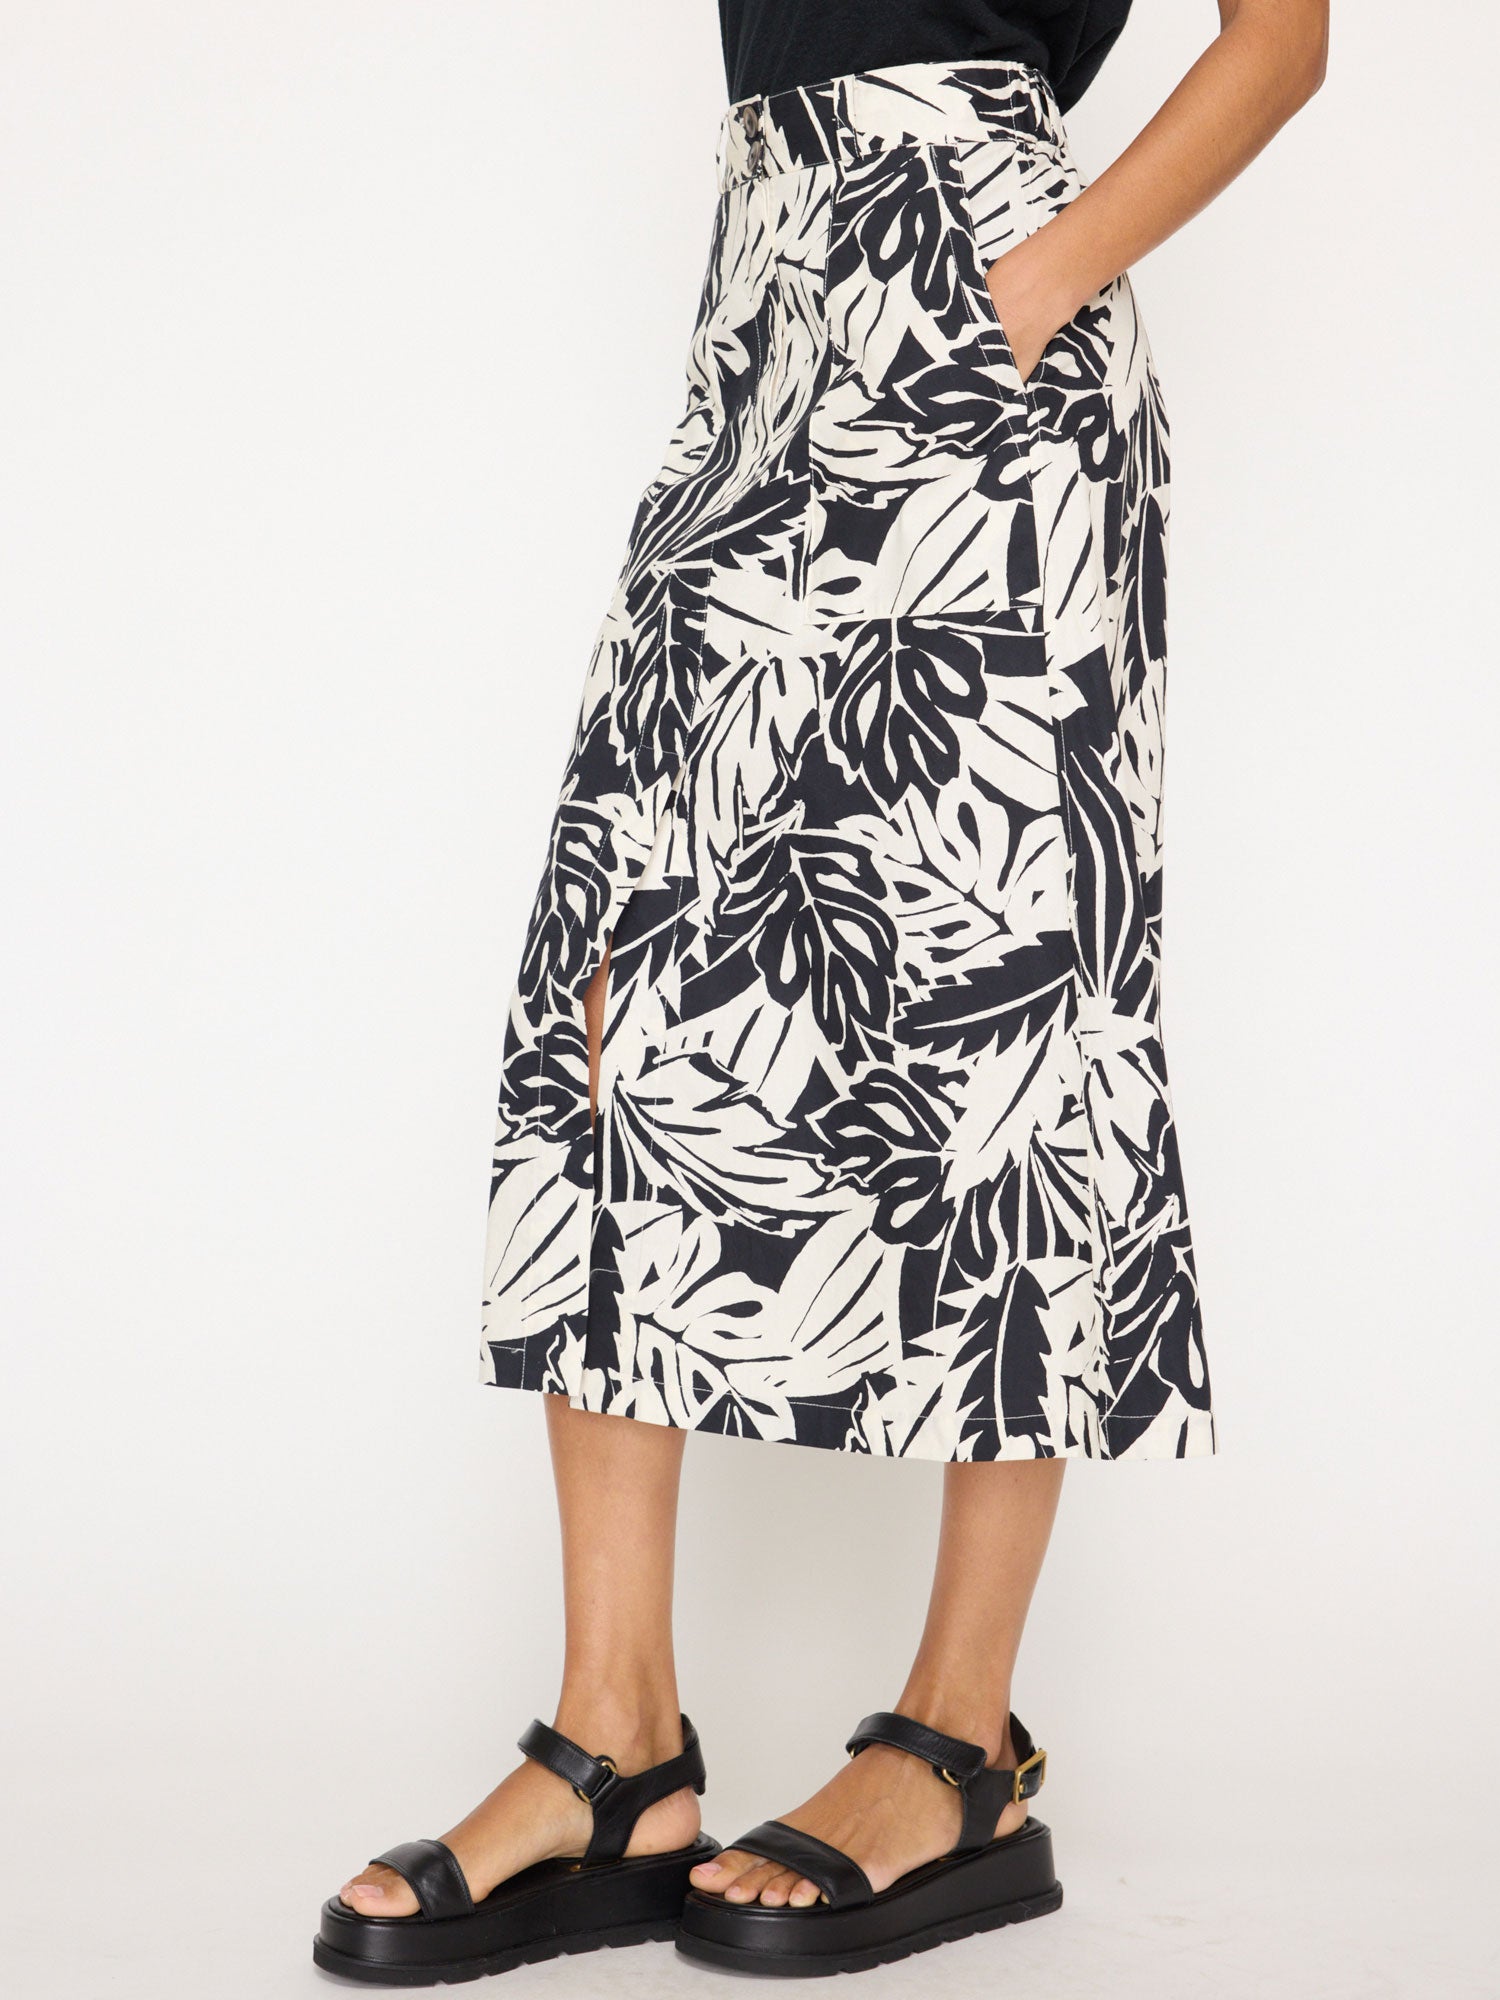 Mica black and white printed midi skirt side view 